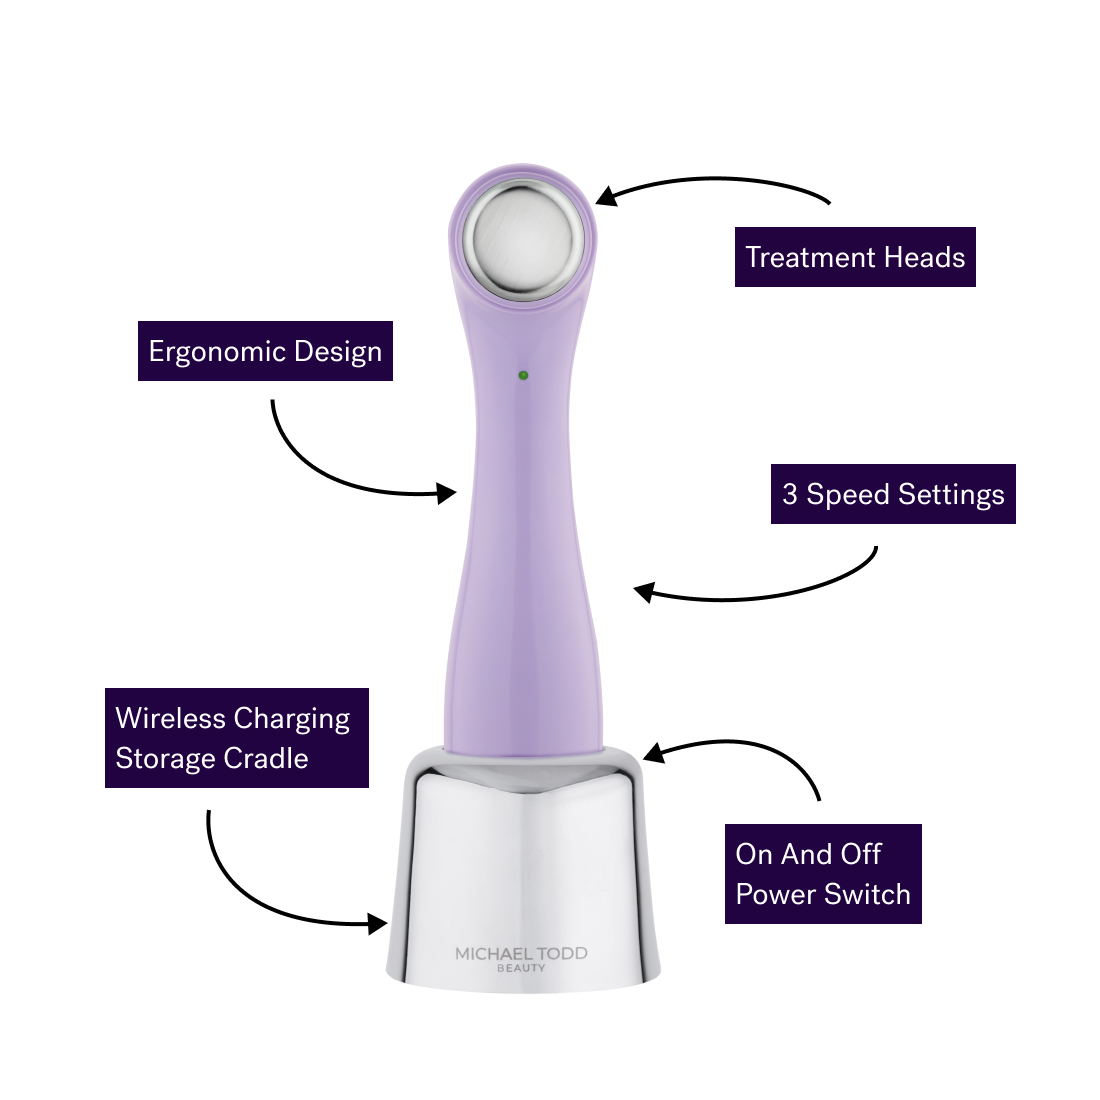 Introducing the Glow All Day by Michael Todd Beauty, a purple electric facial massager that helps achieve a healthy and radiant glow.